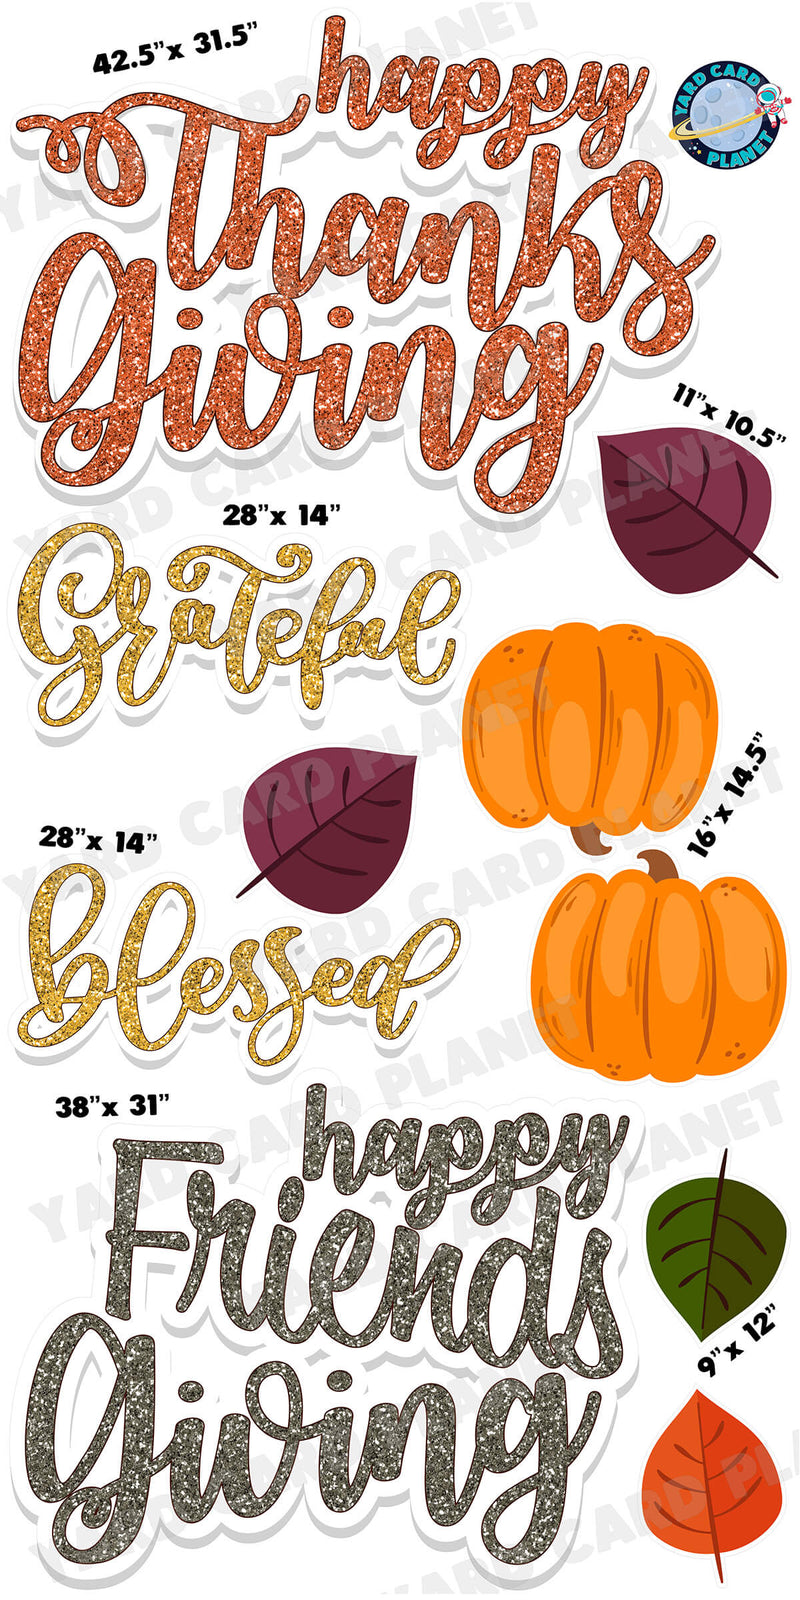 Glitter Pattern Happy Thanksgiving and Happy Friendsgiving EZ Quick Signs and Yard Card Flair Set with Measurements